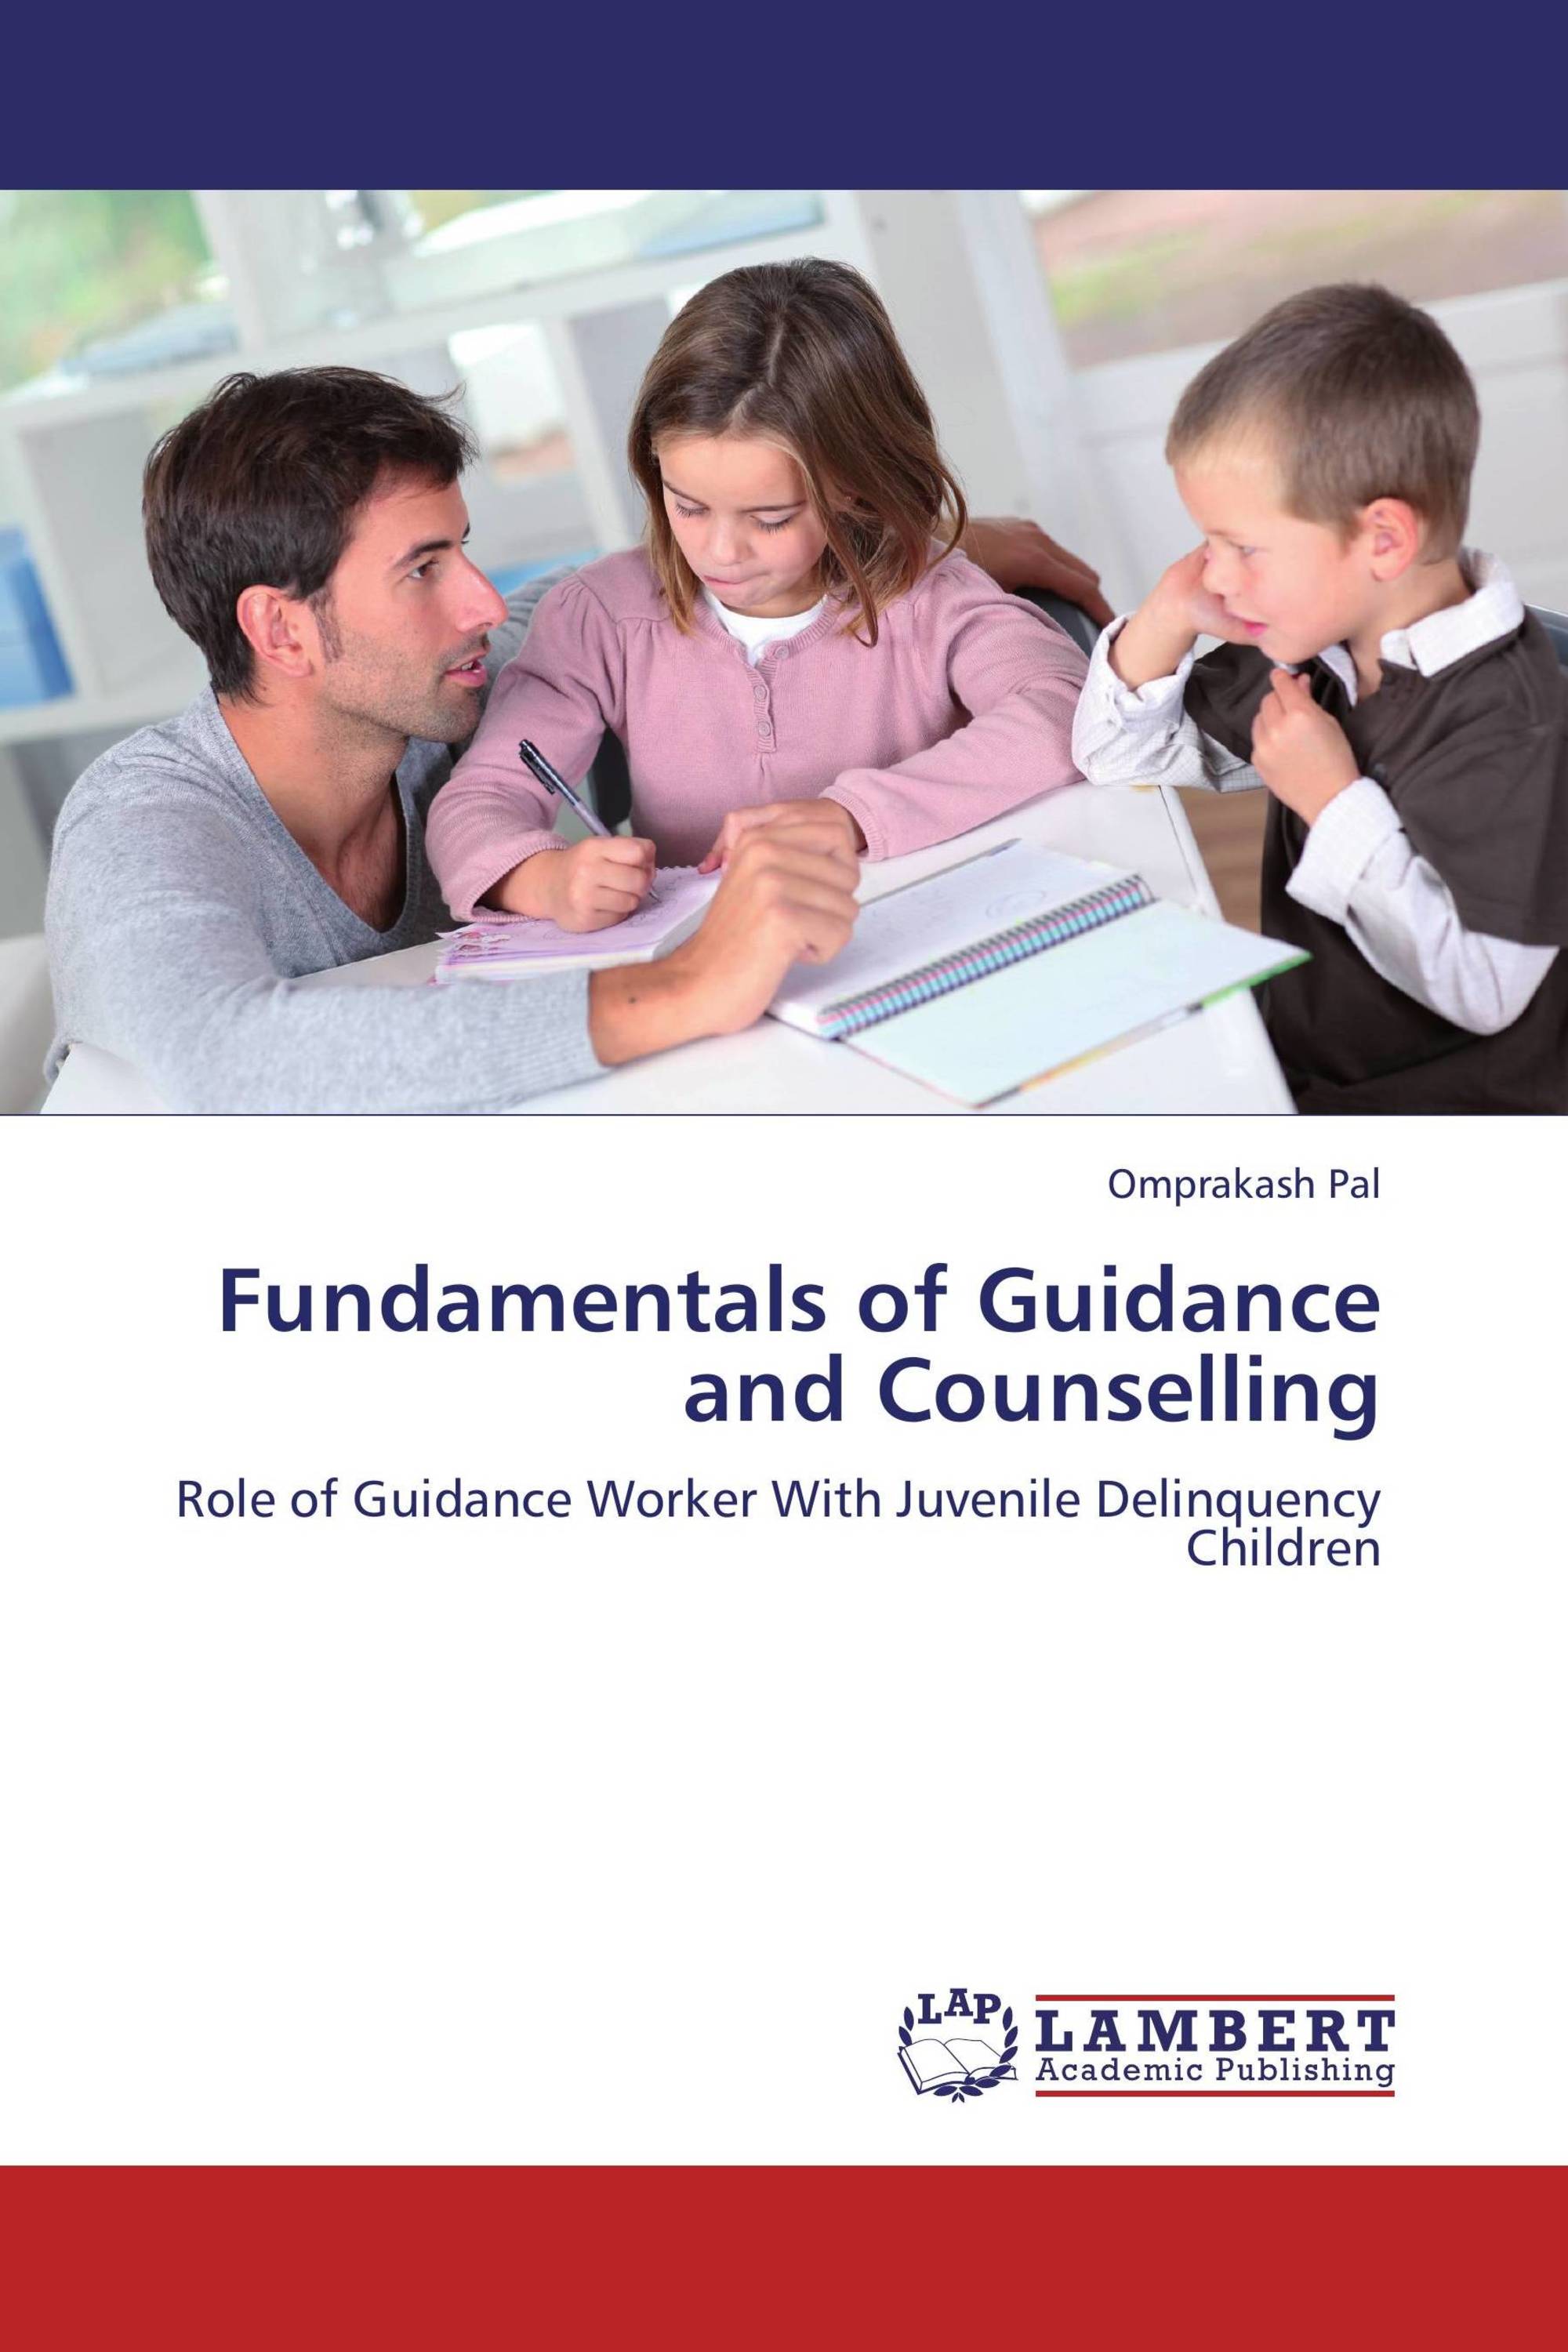 Dissertation on guidance and counselling